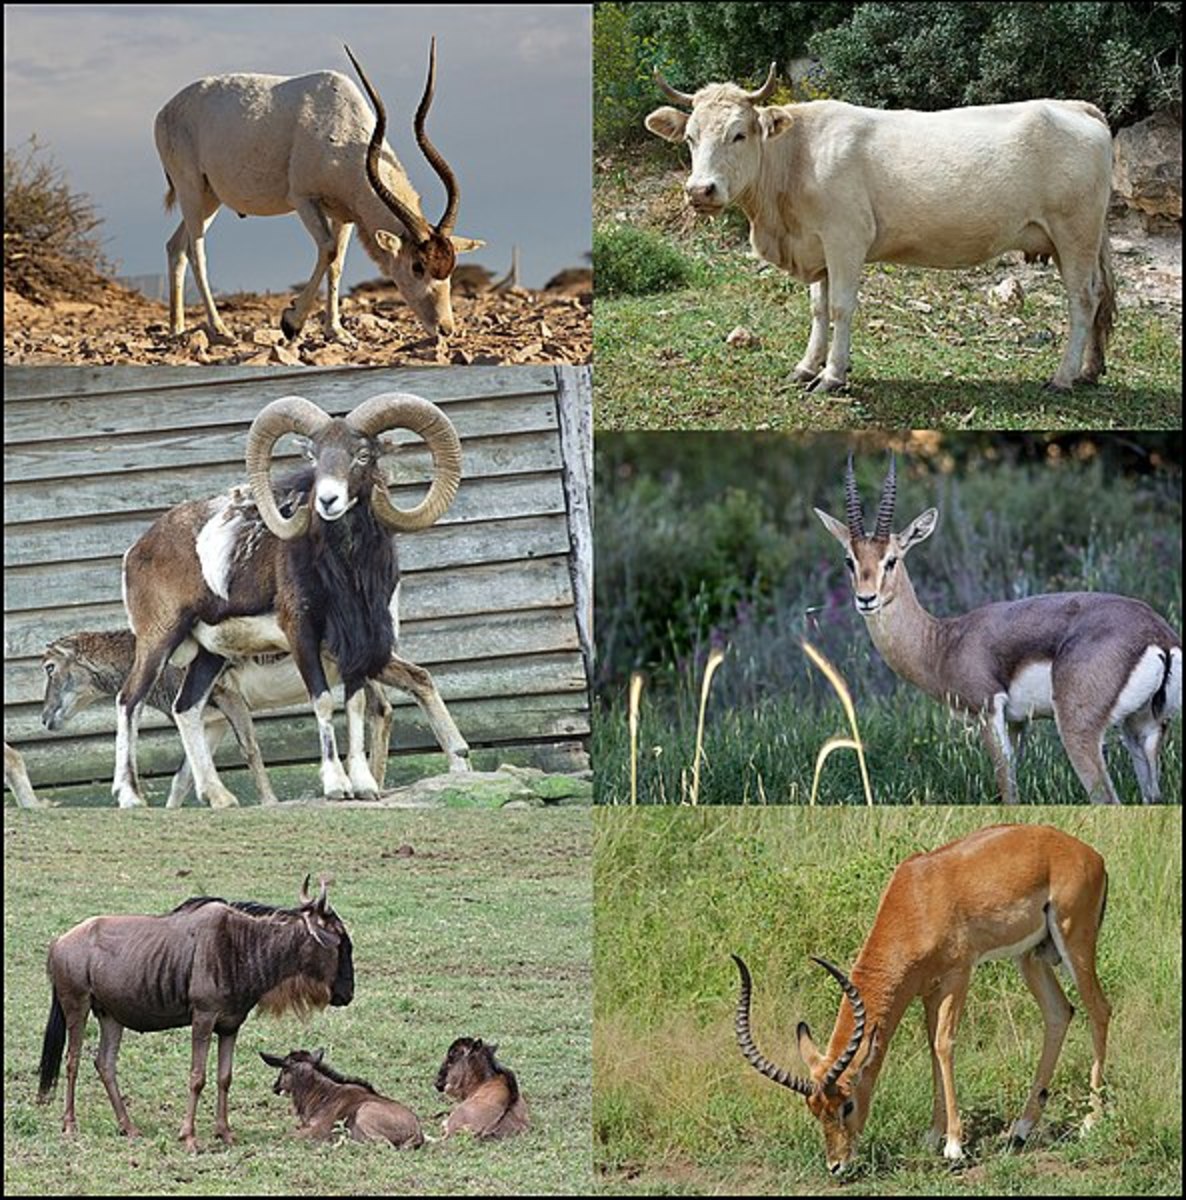 types-of-bovids-bison-buffalo-and-oxen-and-the-fun-fact